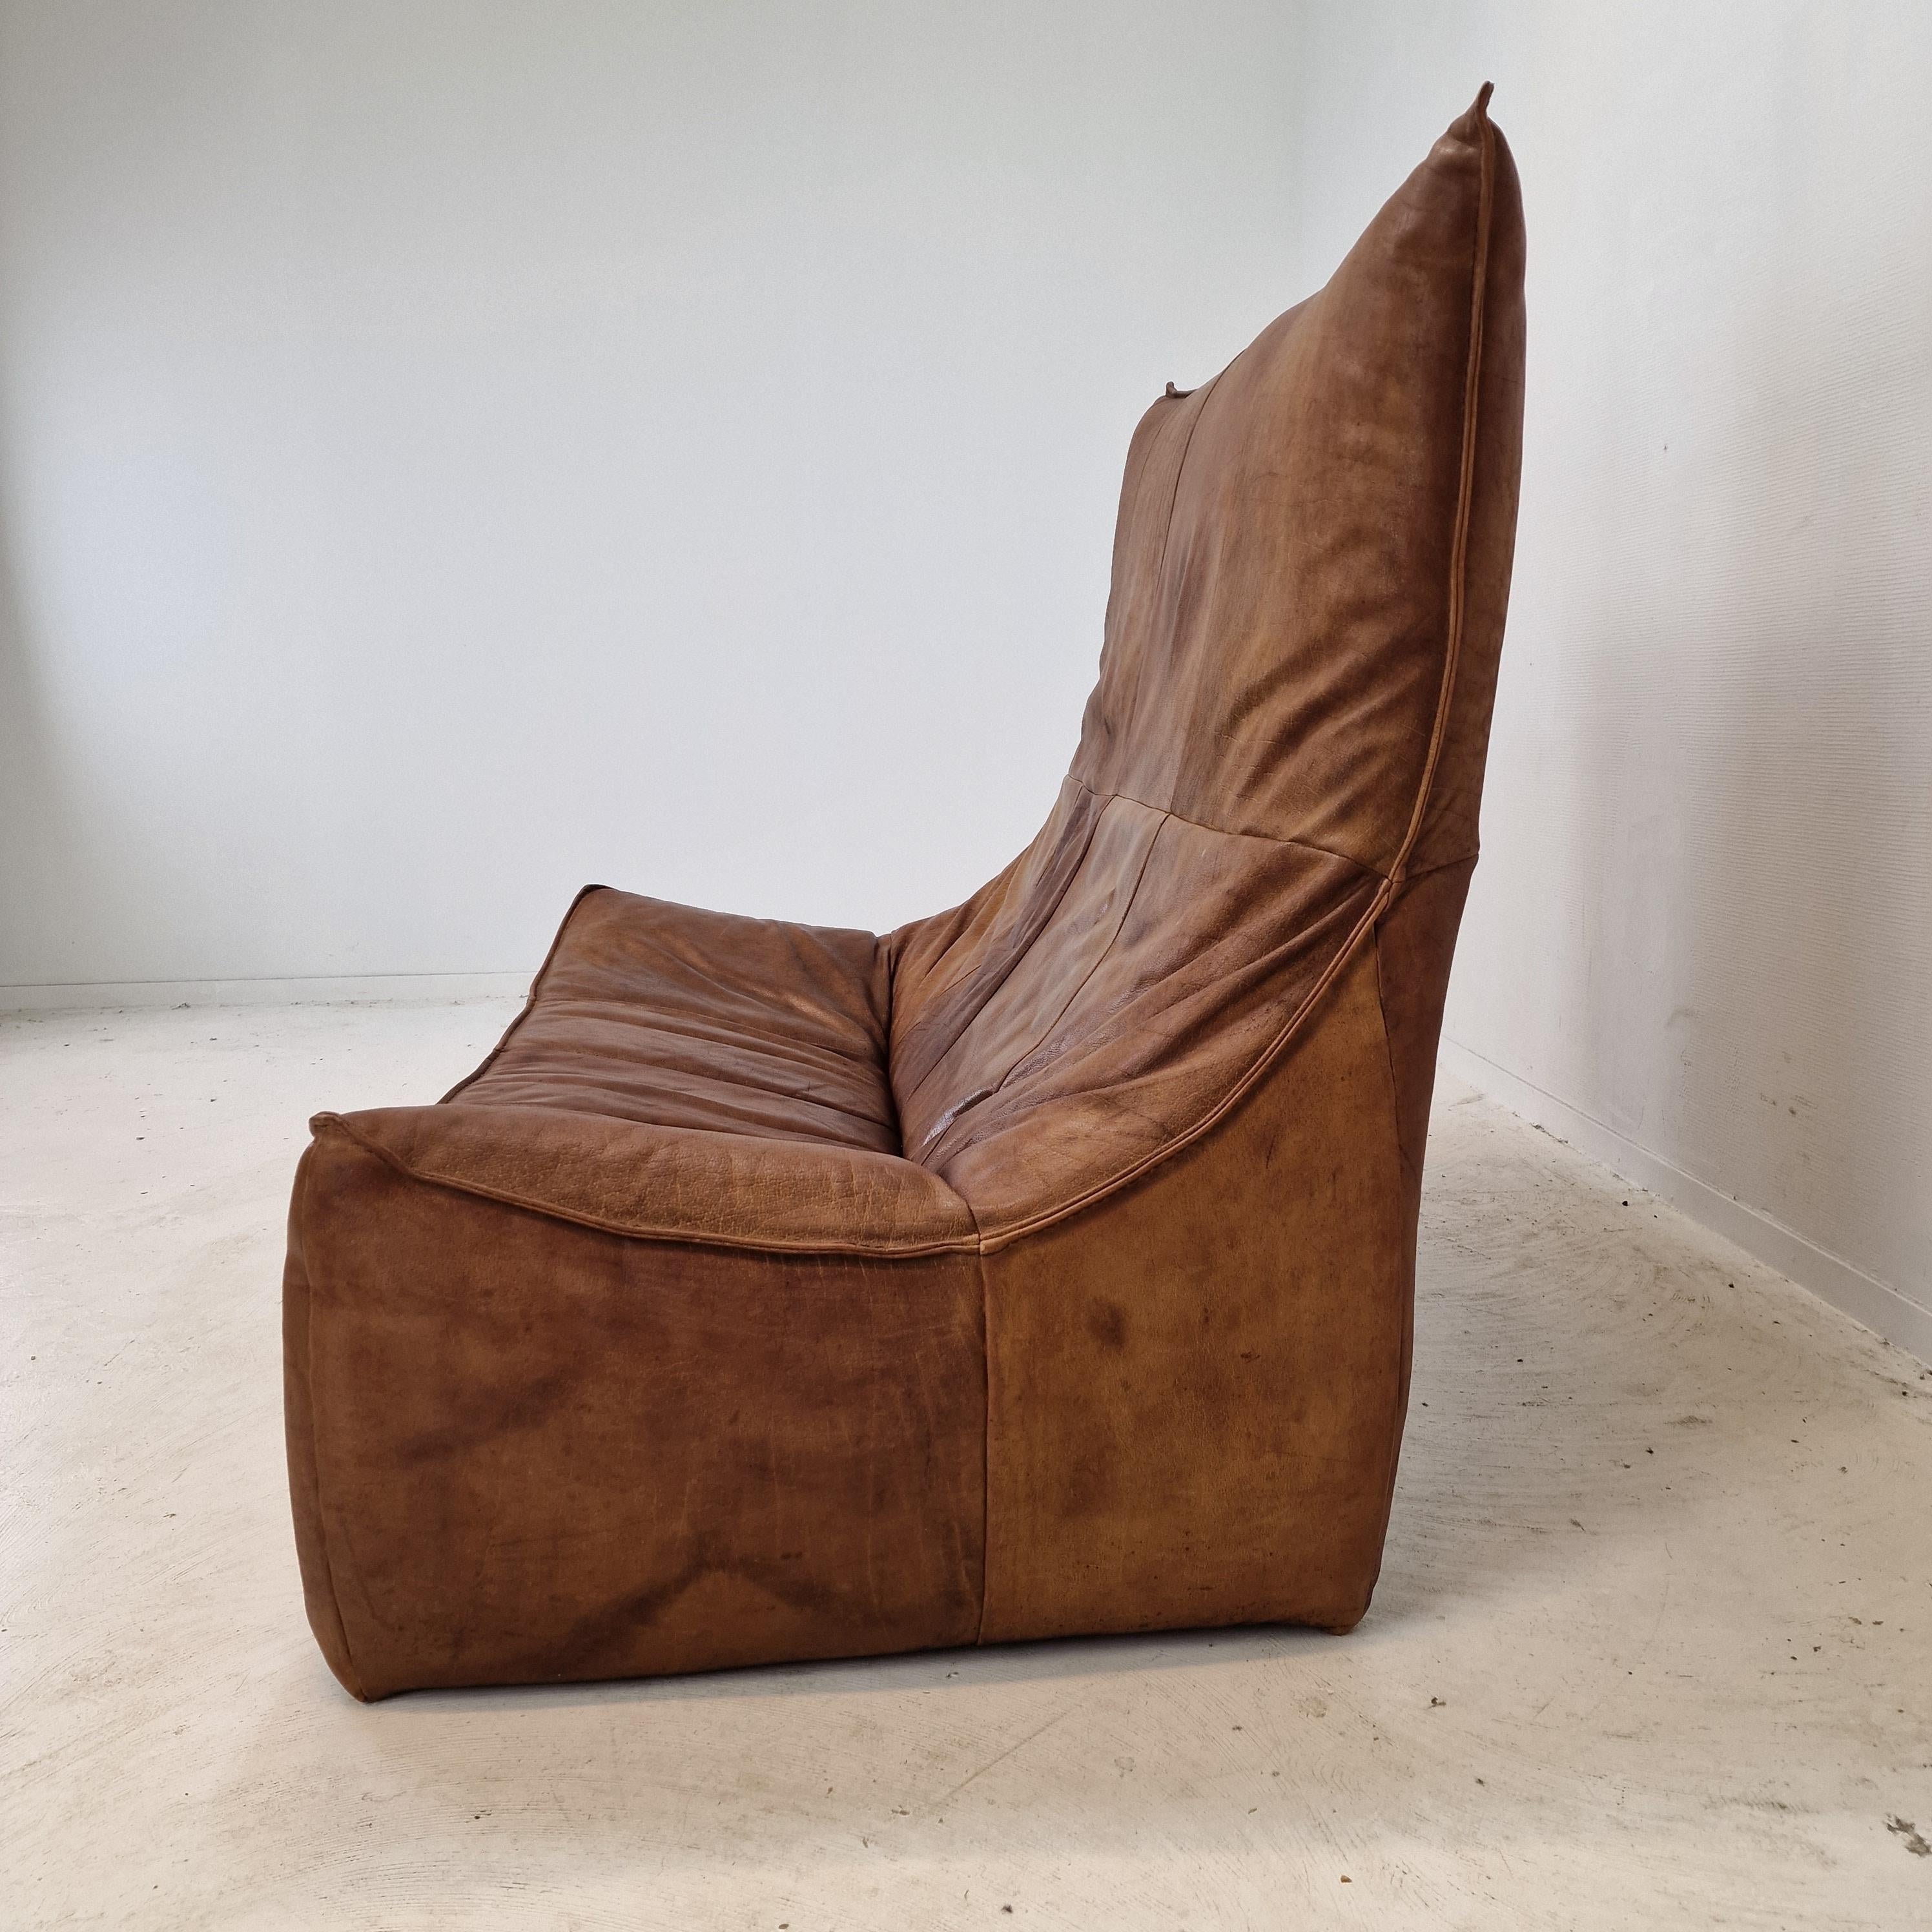 Montis “The Rock” Sofa In Brown Leather By Gerard Van Den Berg, 1970s For Sale 2